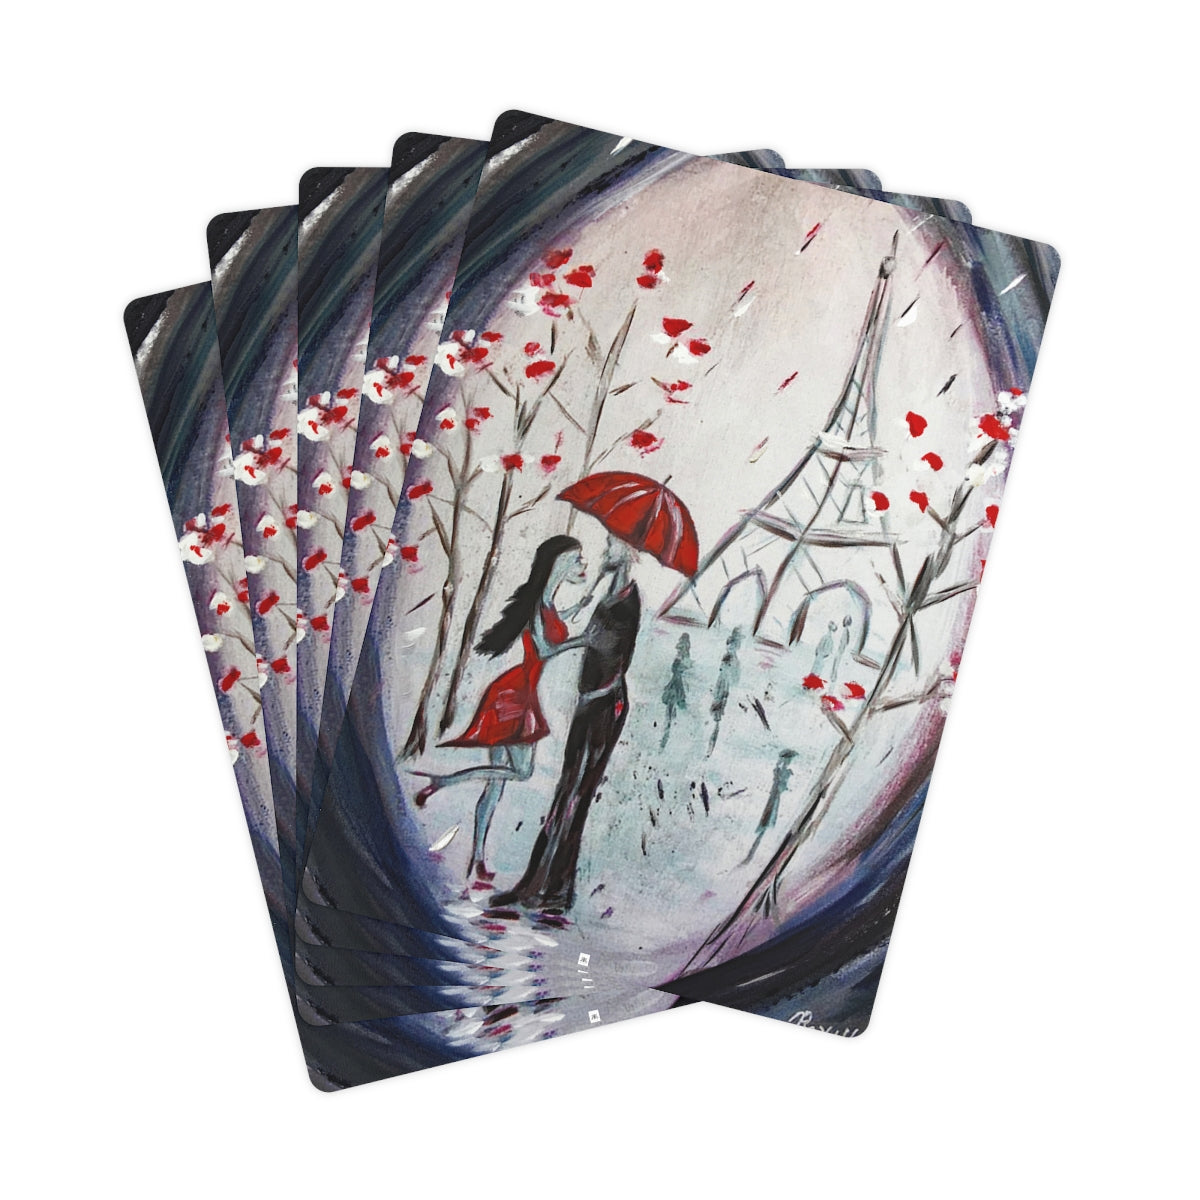 I Only have eyes for You Romantic  Poker Cards/Playing Cards